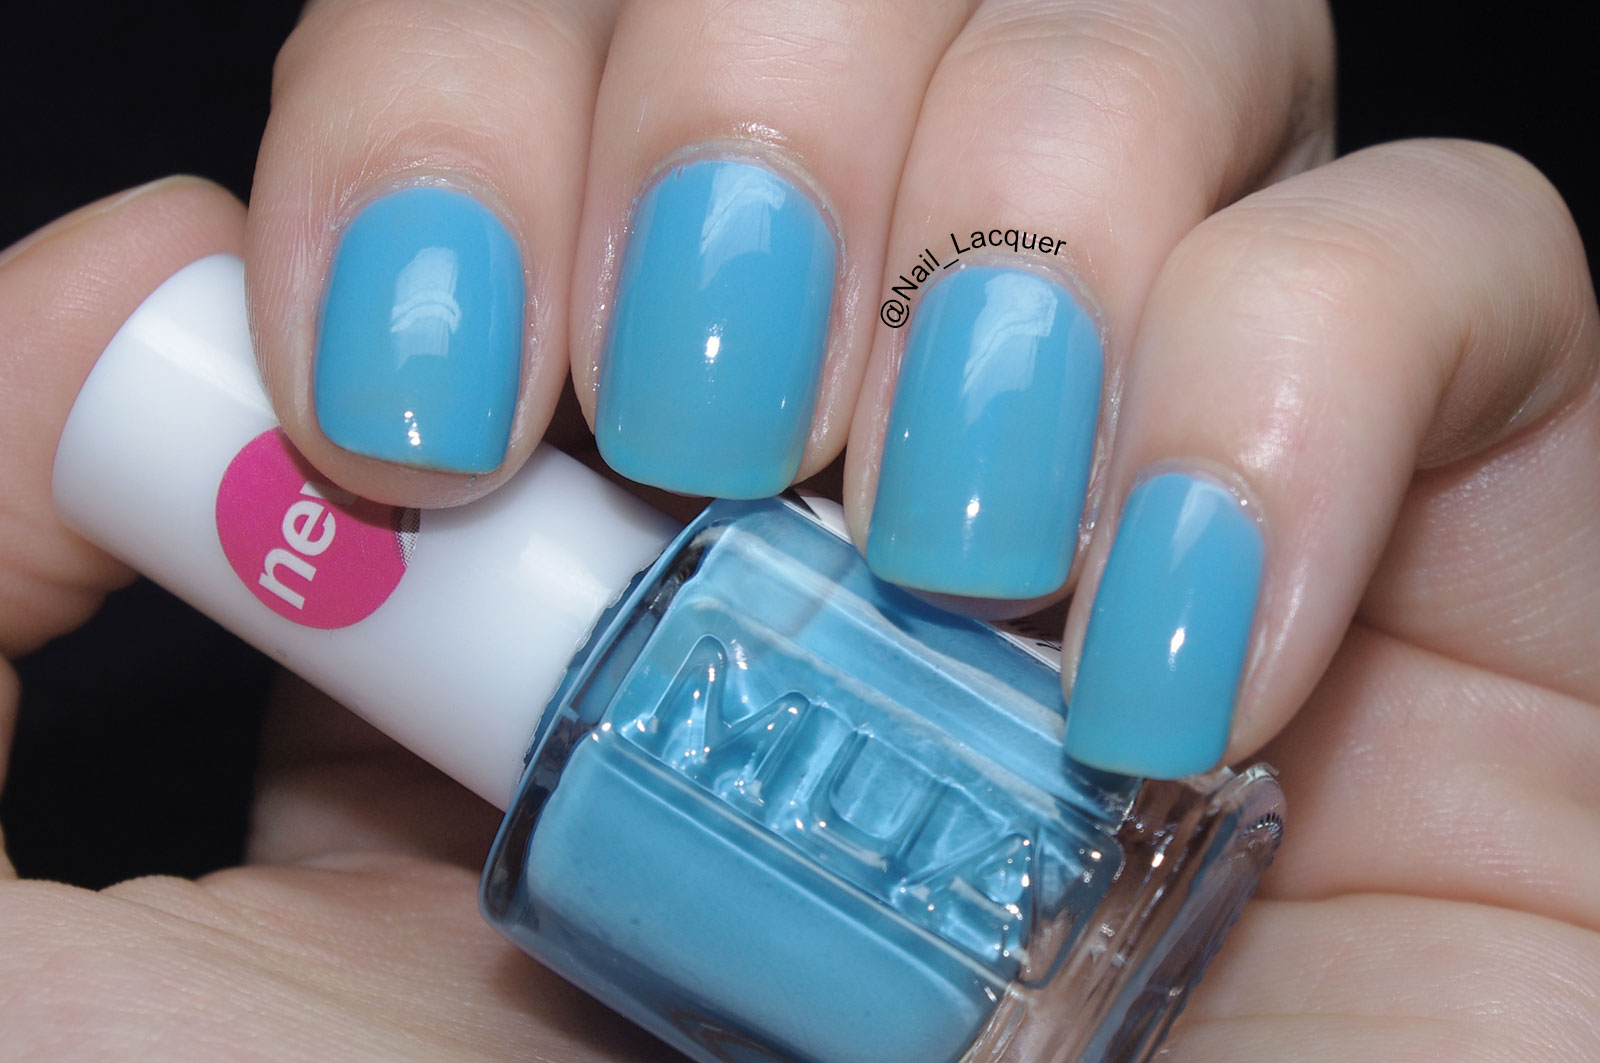 5. "Bold nail polish colors for under nail statement" - wide 8